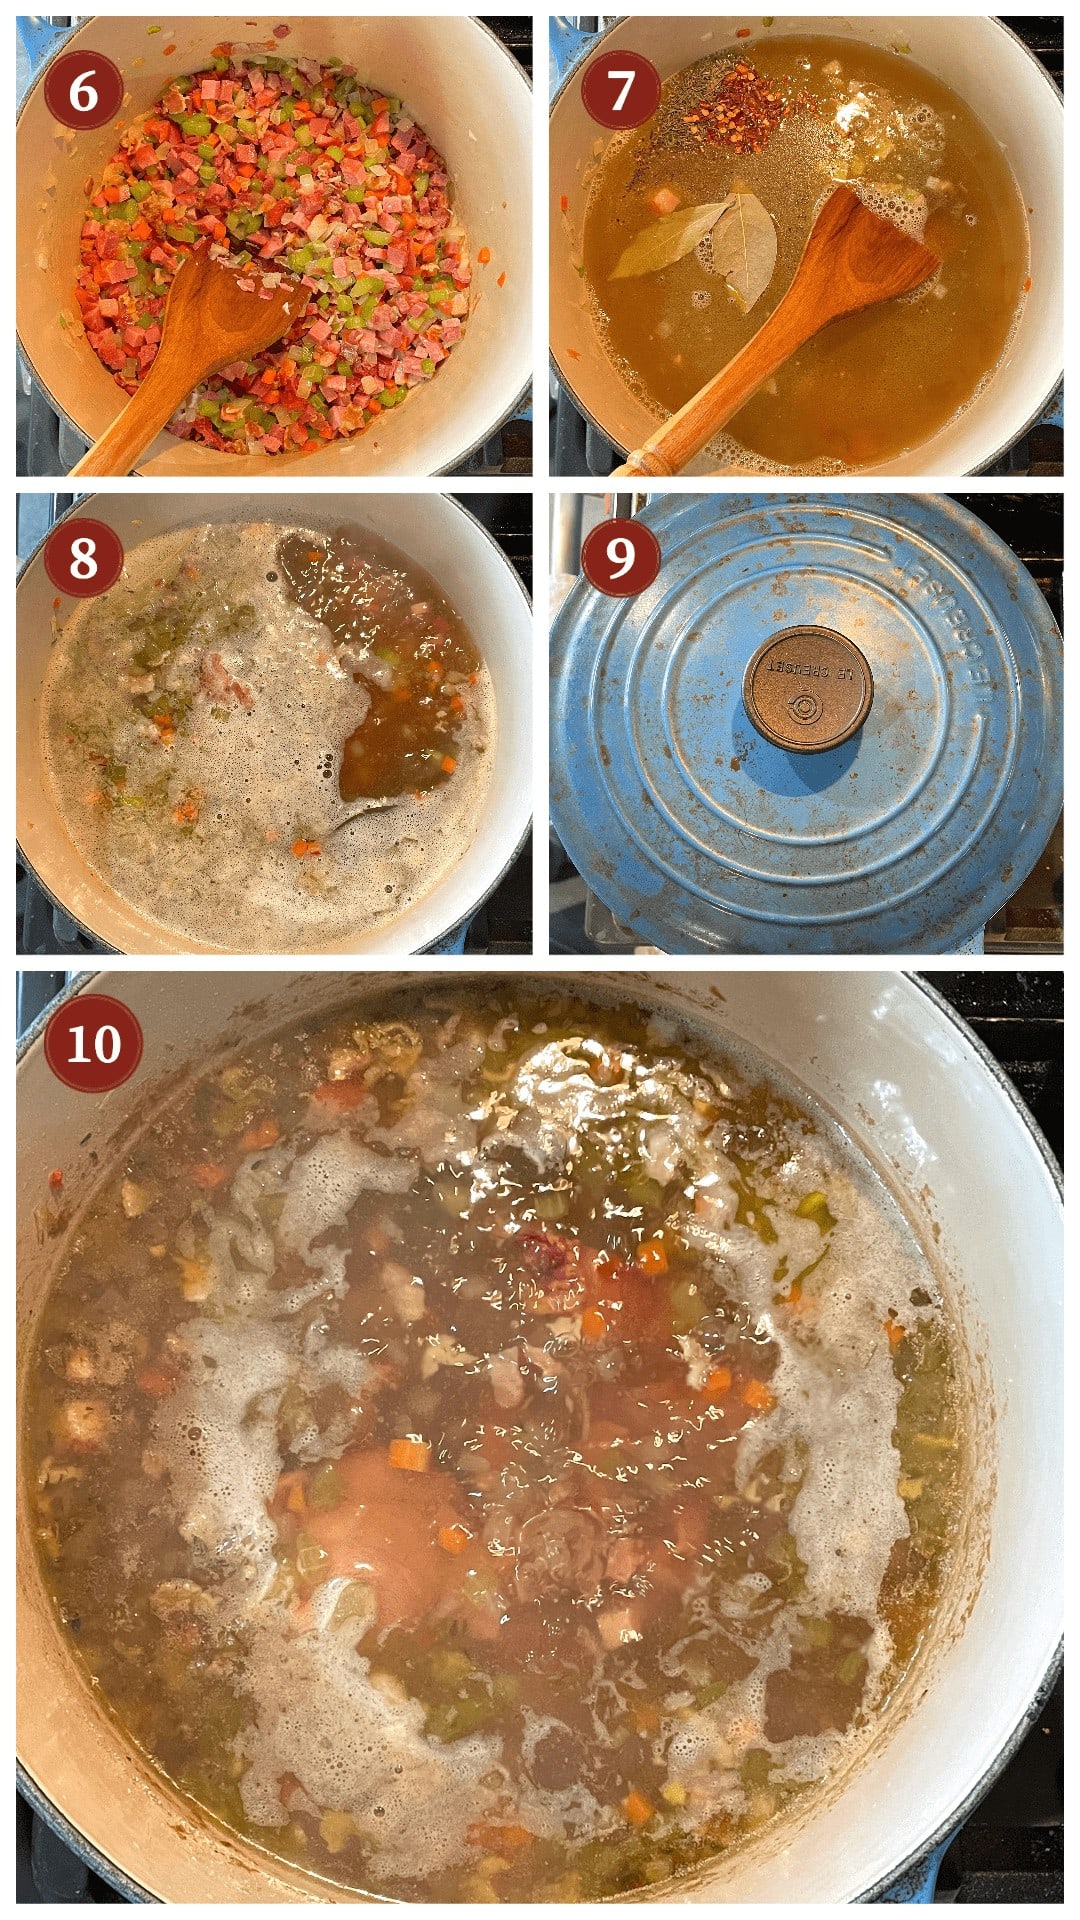 A collage of images showing how to prepare Southern butterbeans with tasso, steps 6-10.